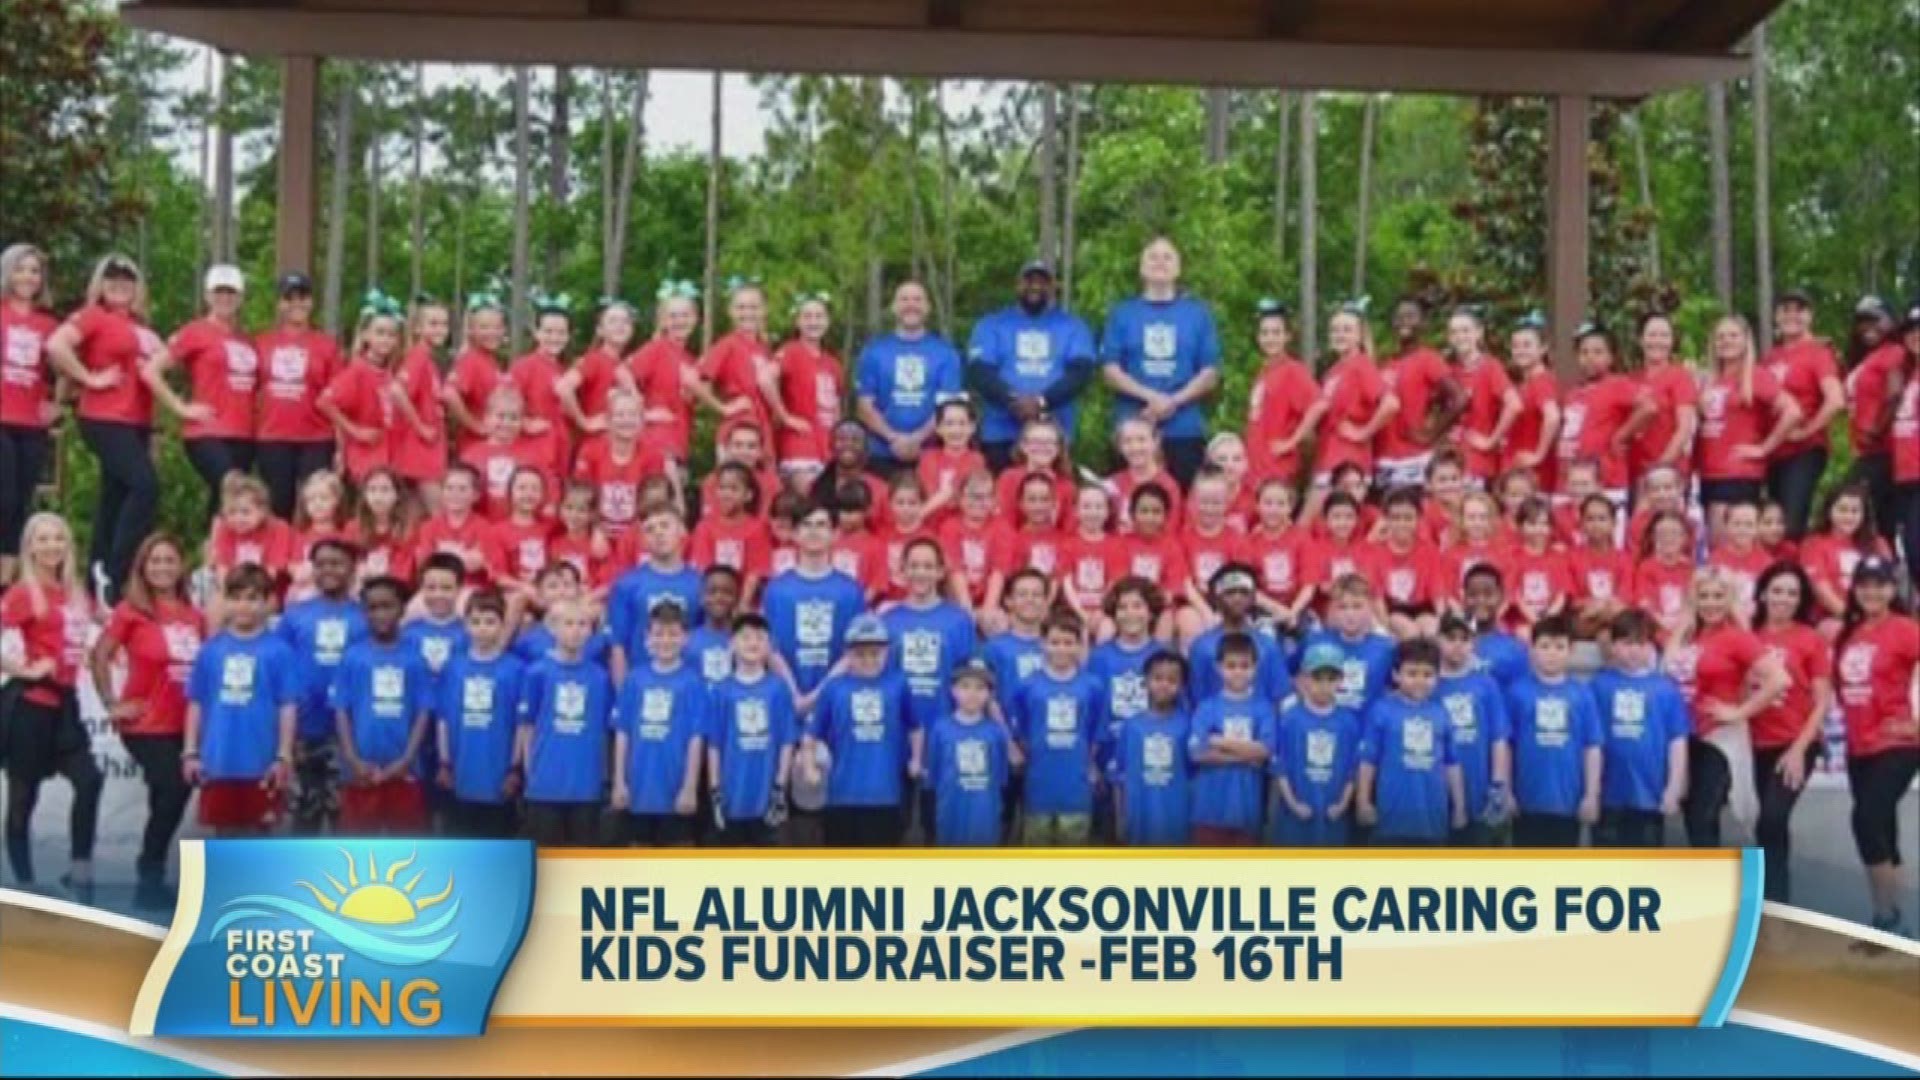 Learn More About The 2nd Annual Nfl Alumni Jacksonville Caring For